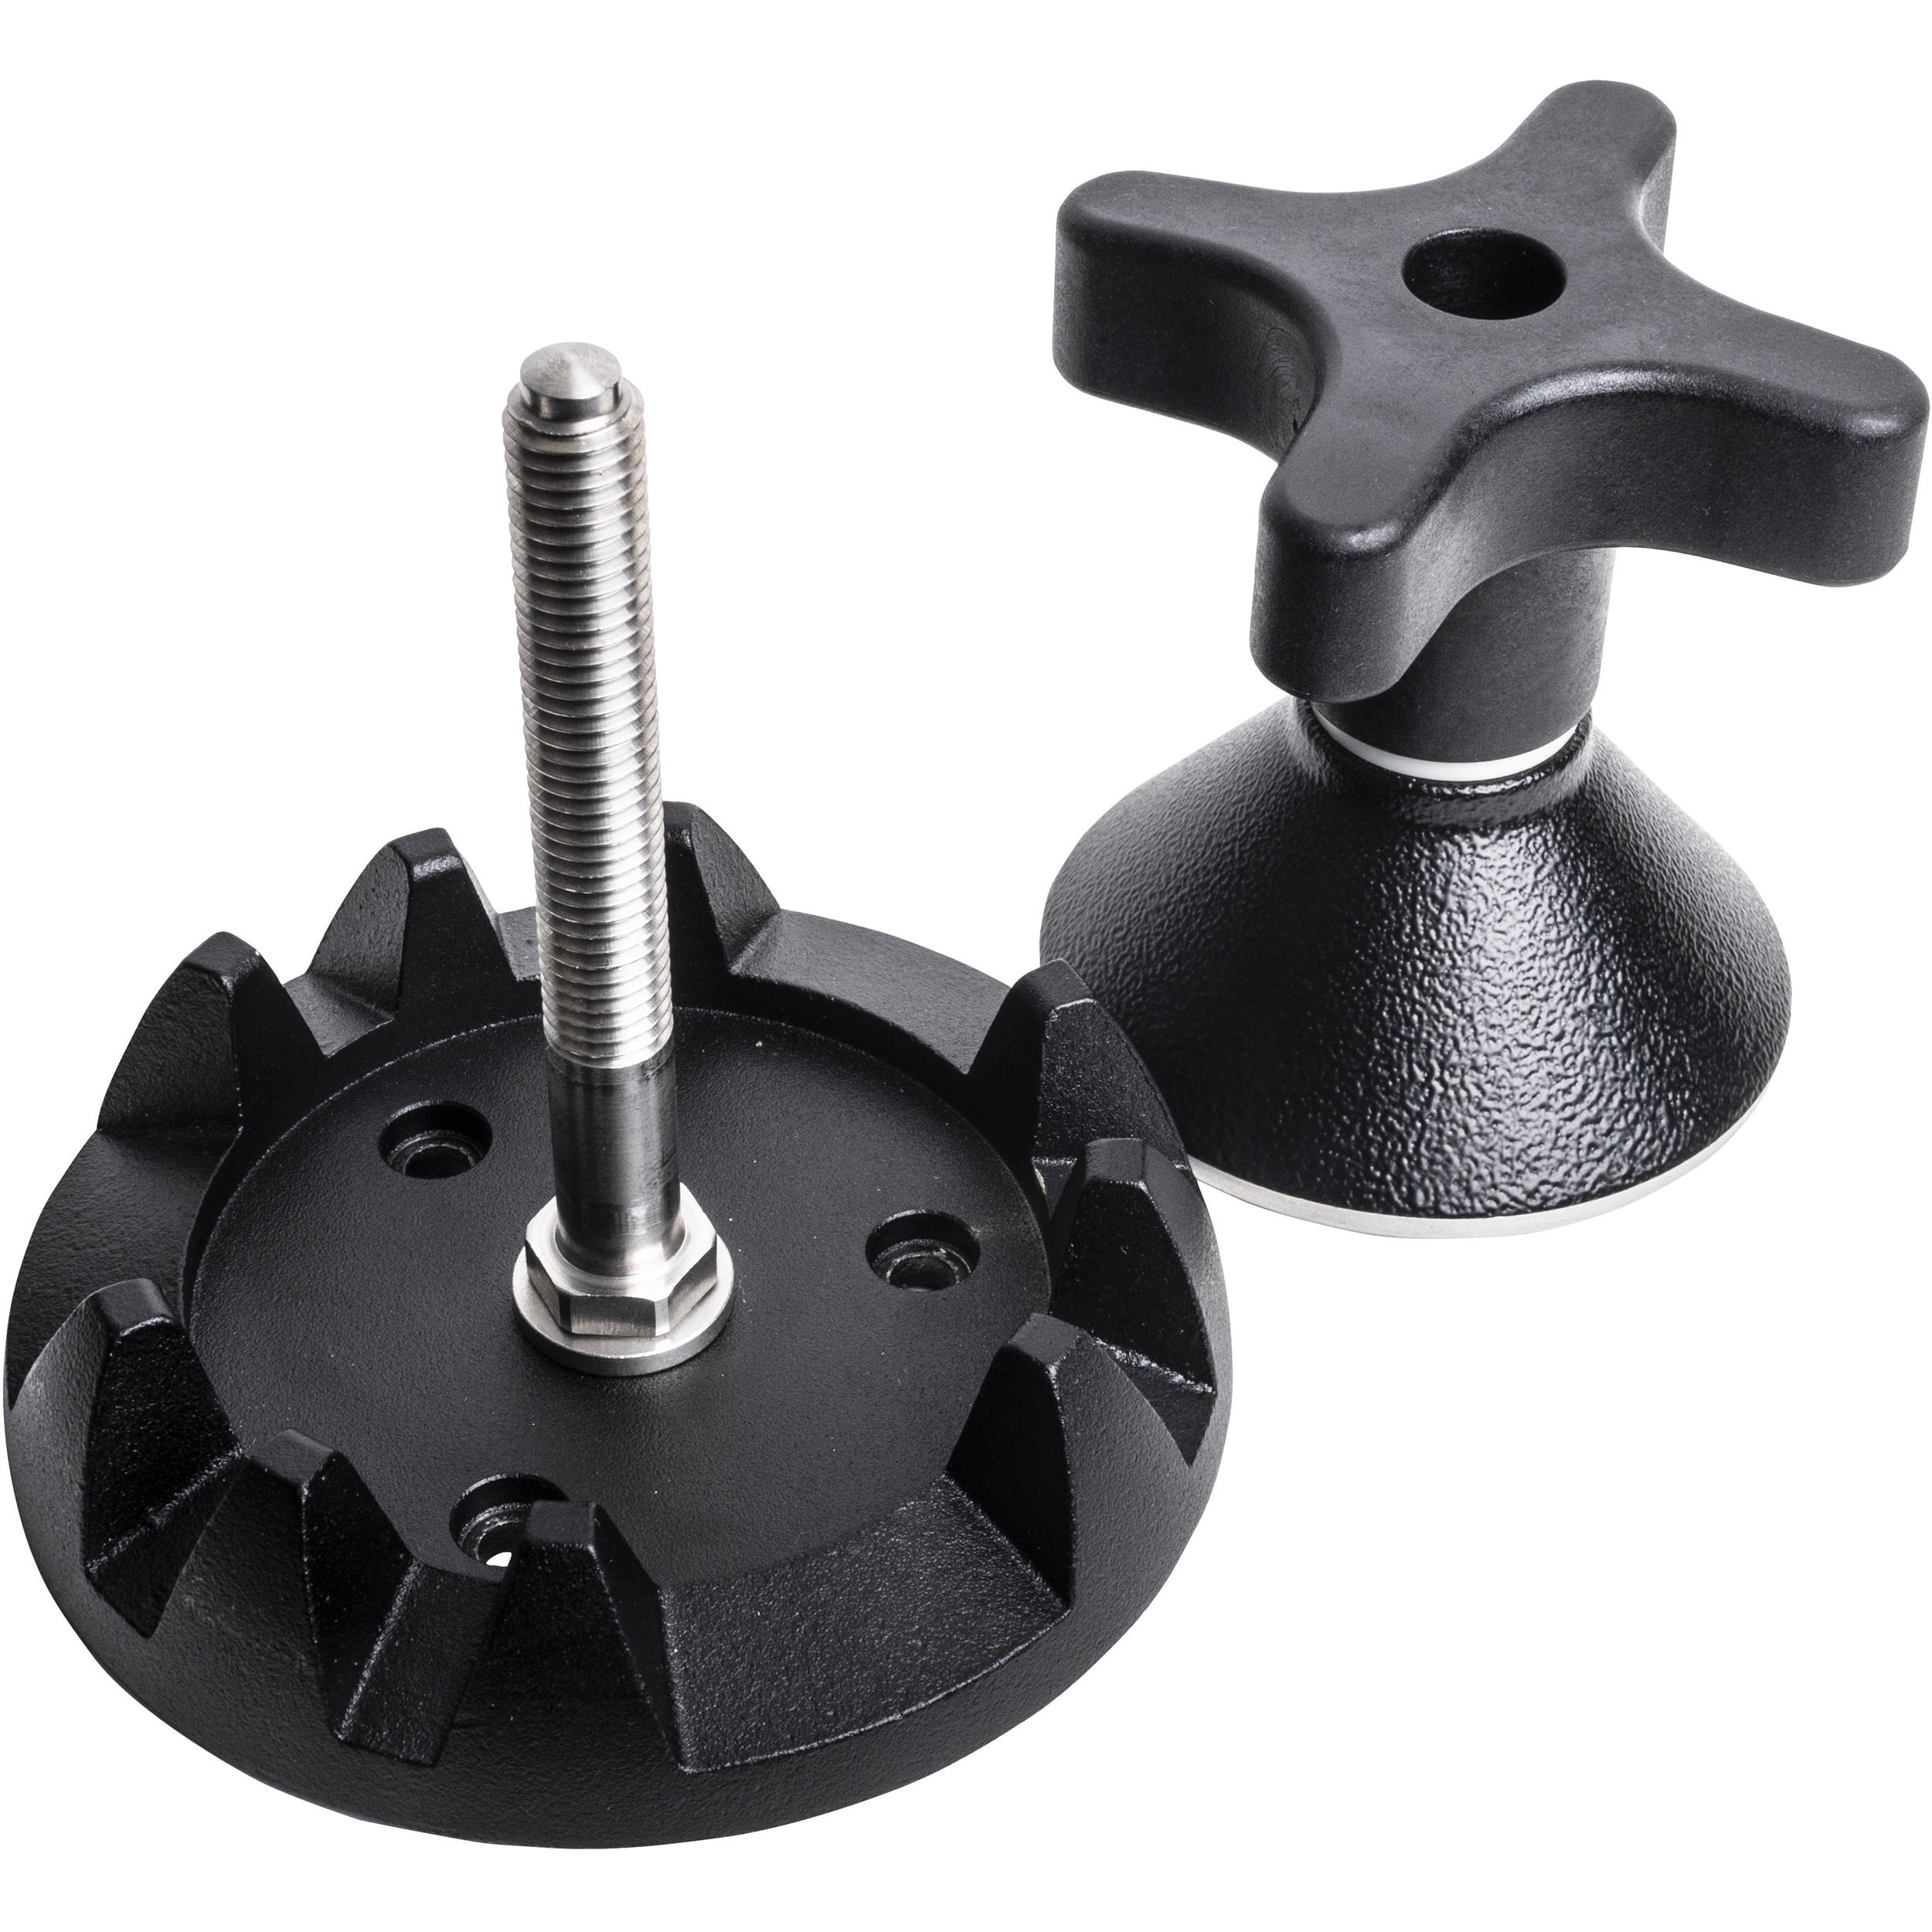 Miller D100 Claw Ball Level Adapter for ArrowFX Fluid Head and 100mm Bowl